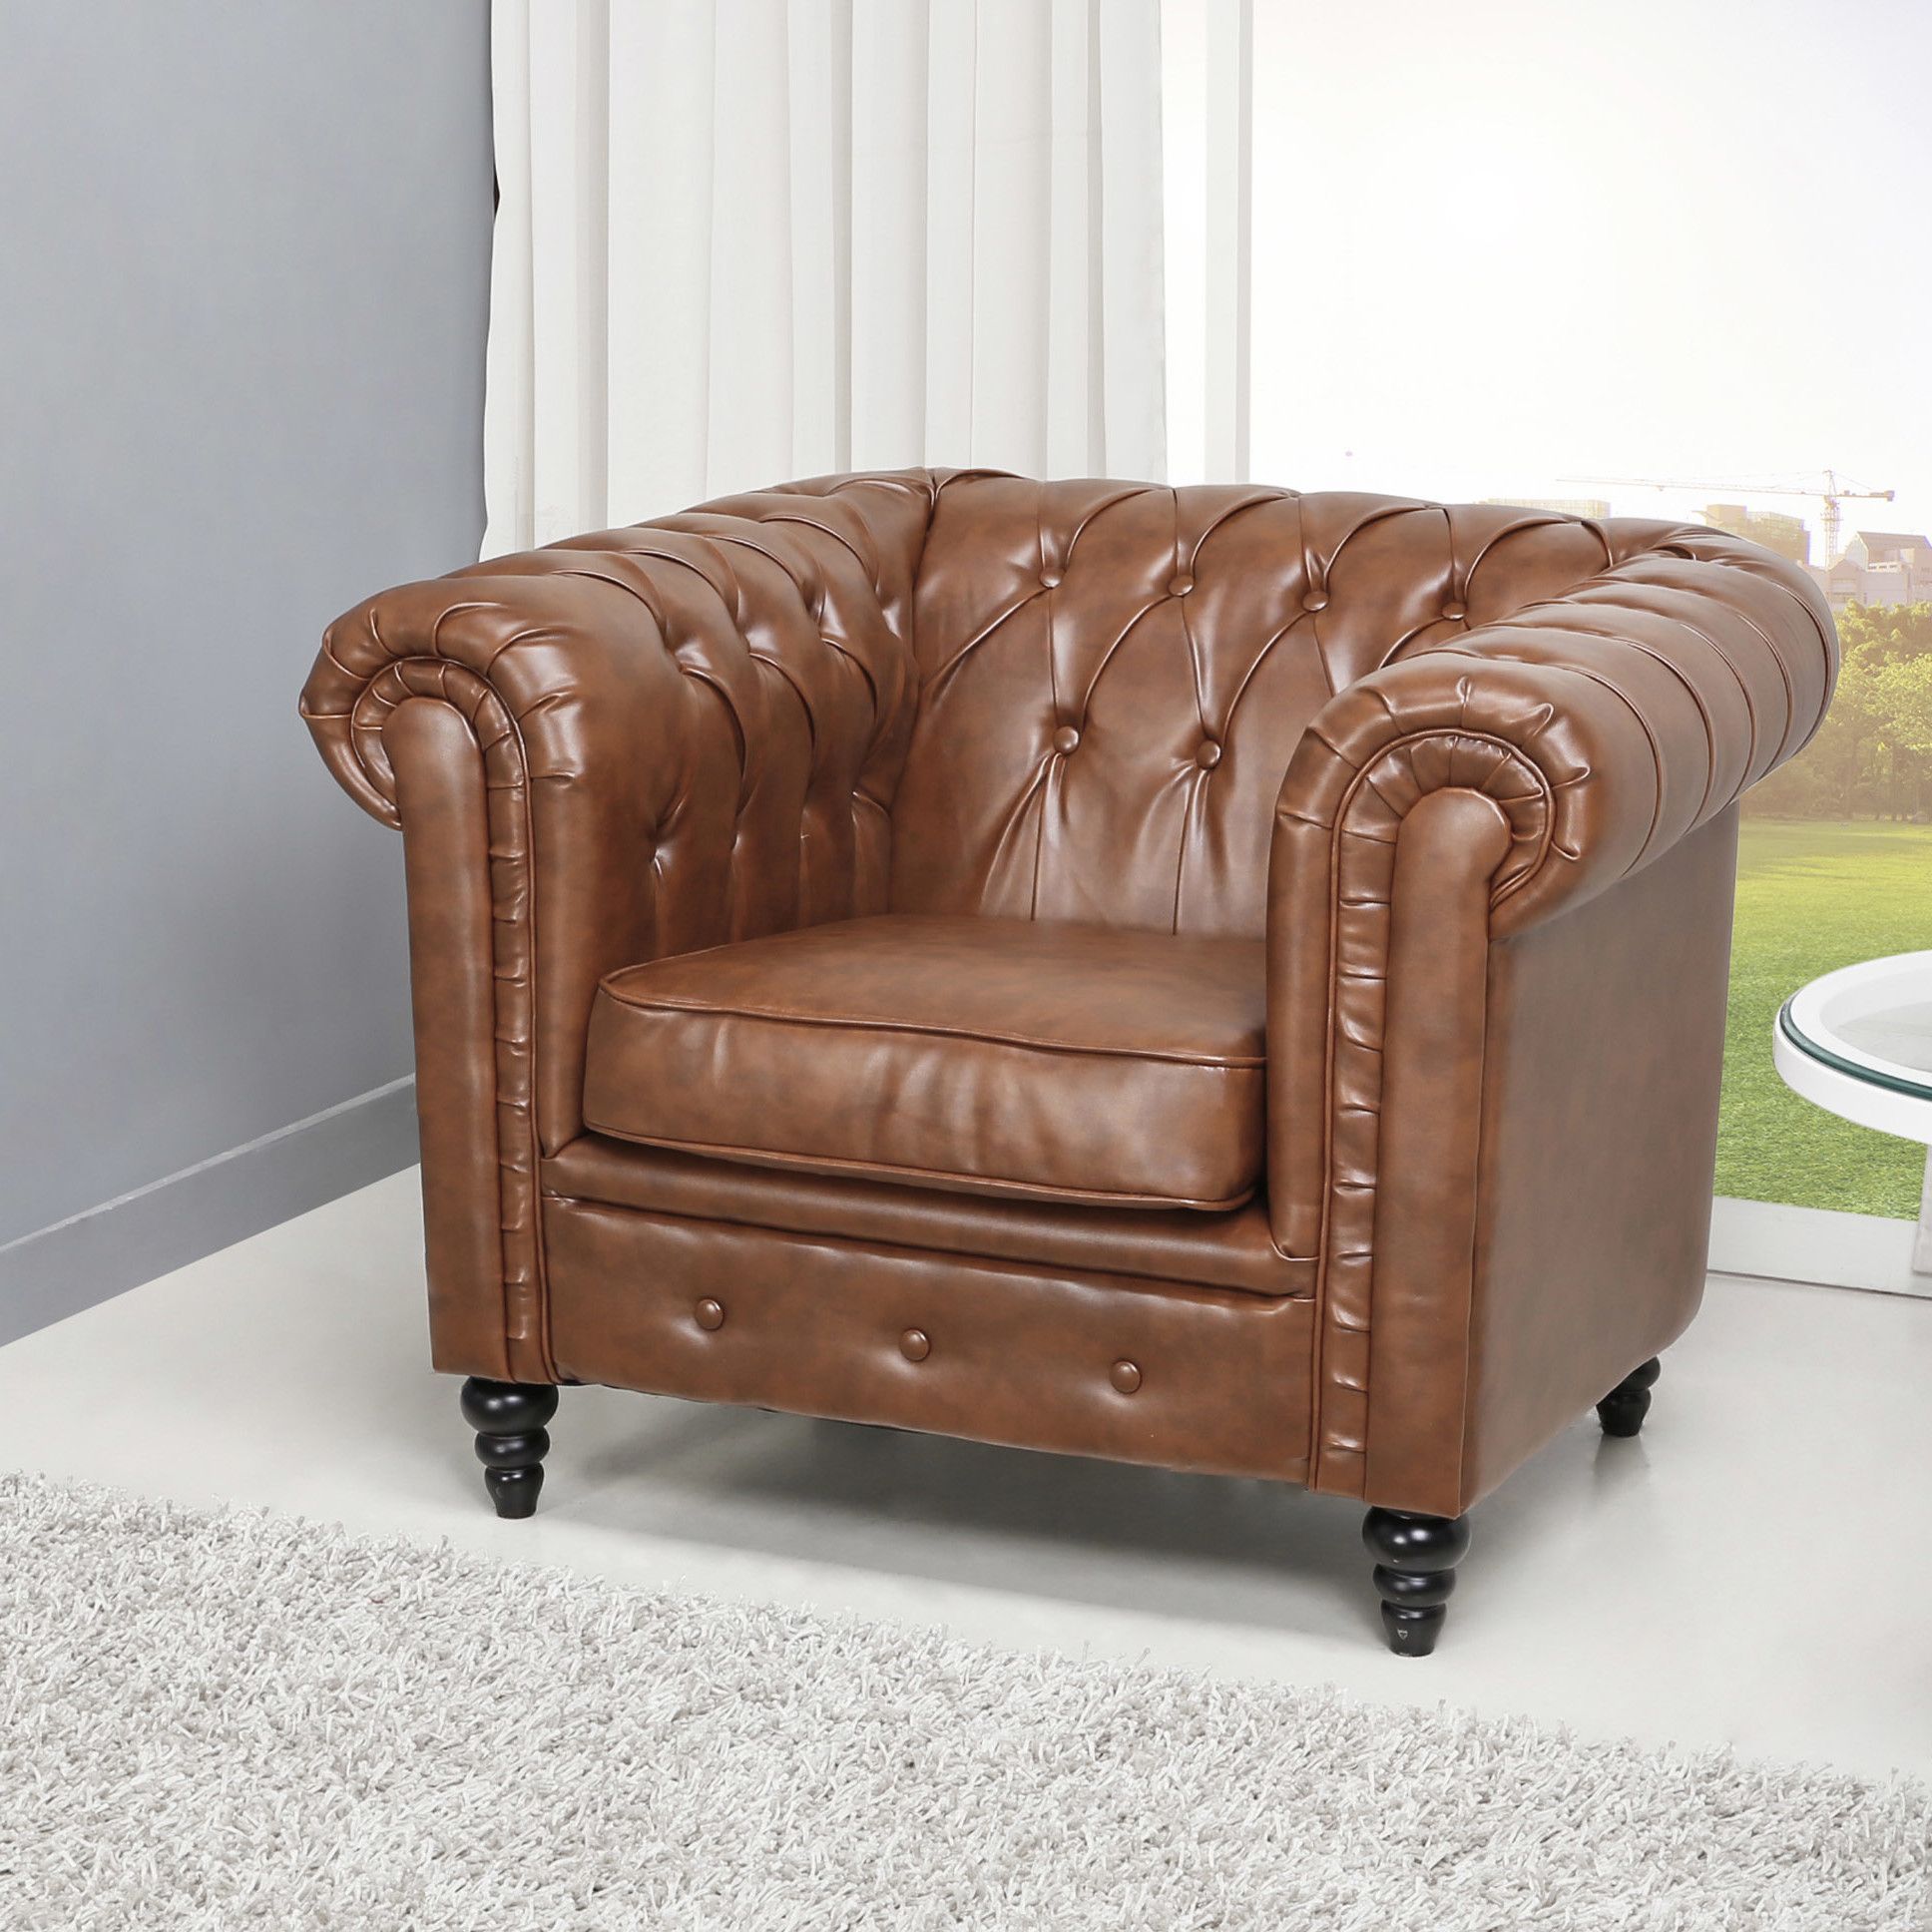 Wilmington Button Tufted Arm Chair | Products | Pinterest | Products In Twirl Swivel Accent Chairs (View 16 of 20)